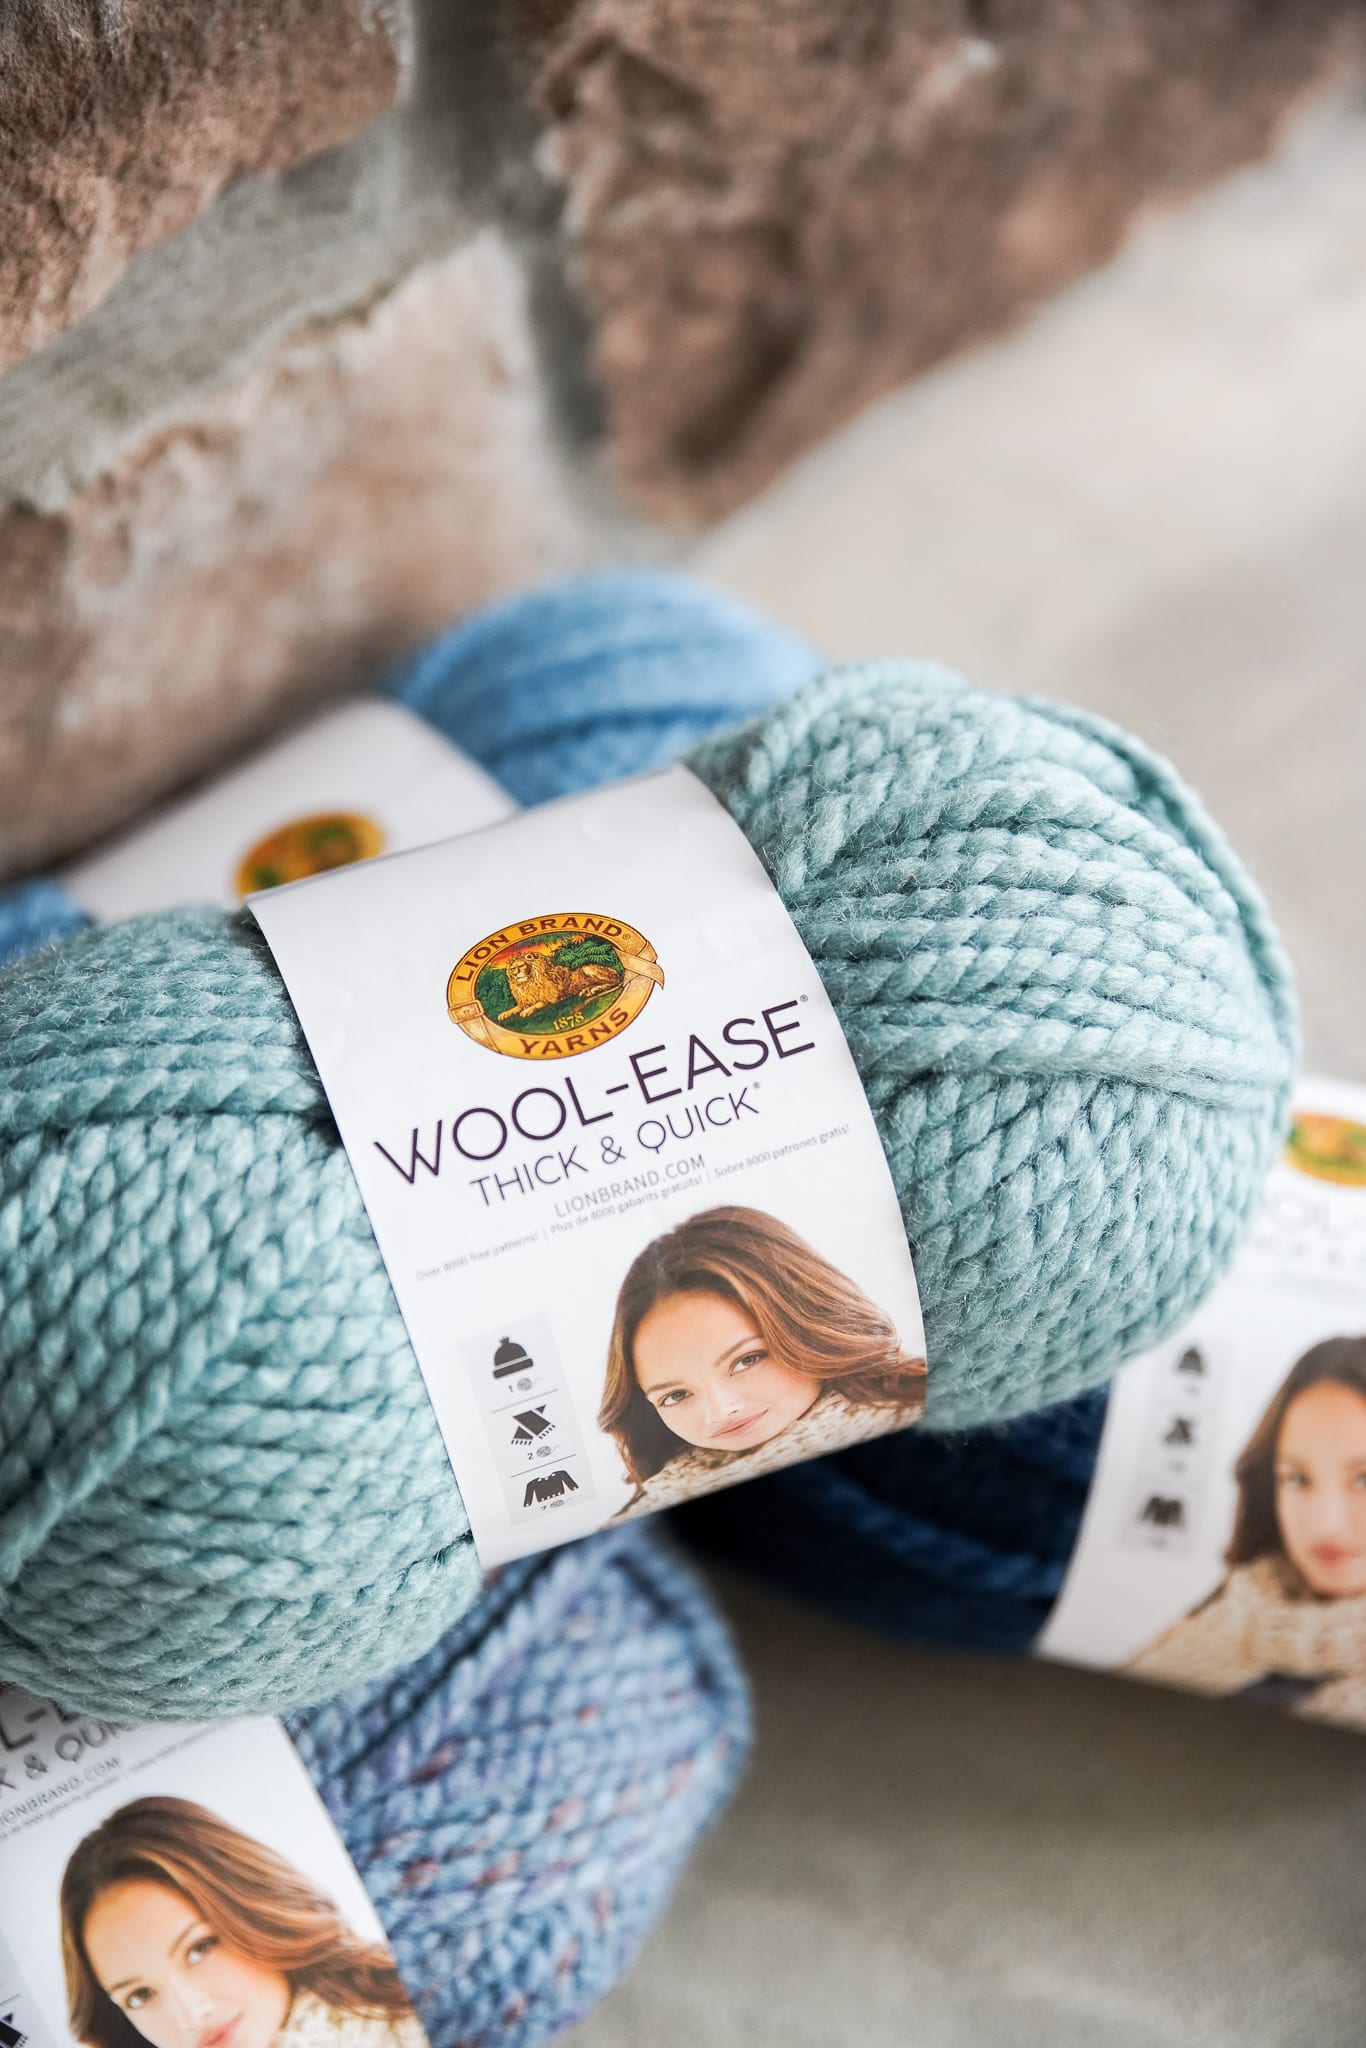 Lion Brand Wool Ease Thick and Quick yarn used in the how to crochet a flat circle tutorial